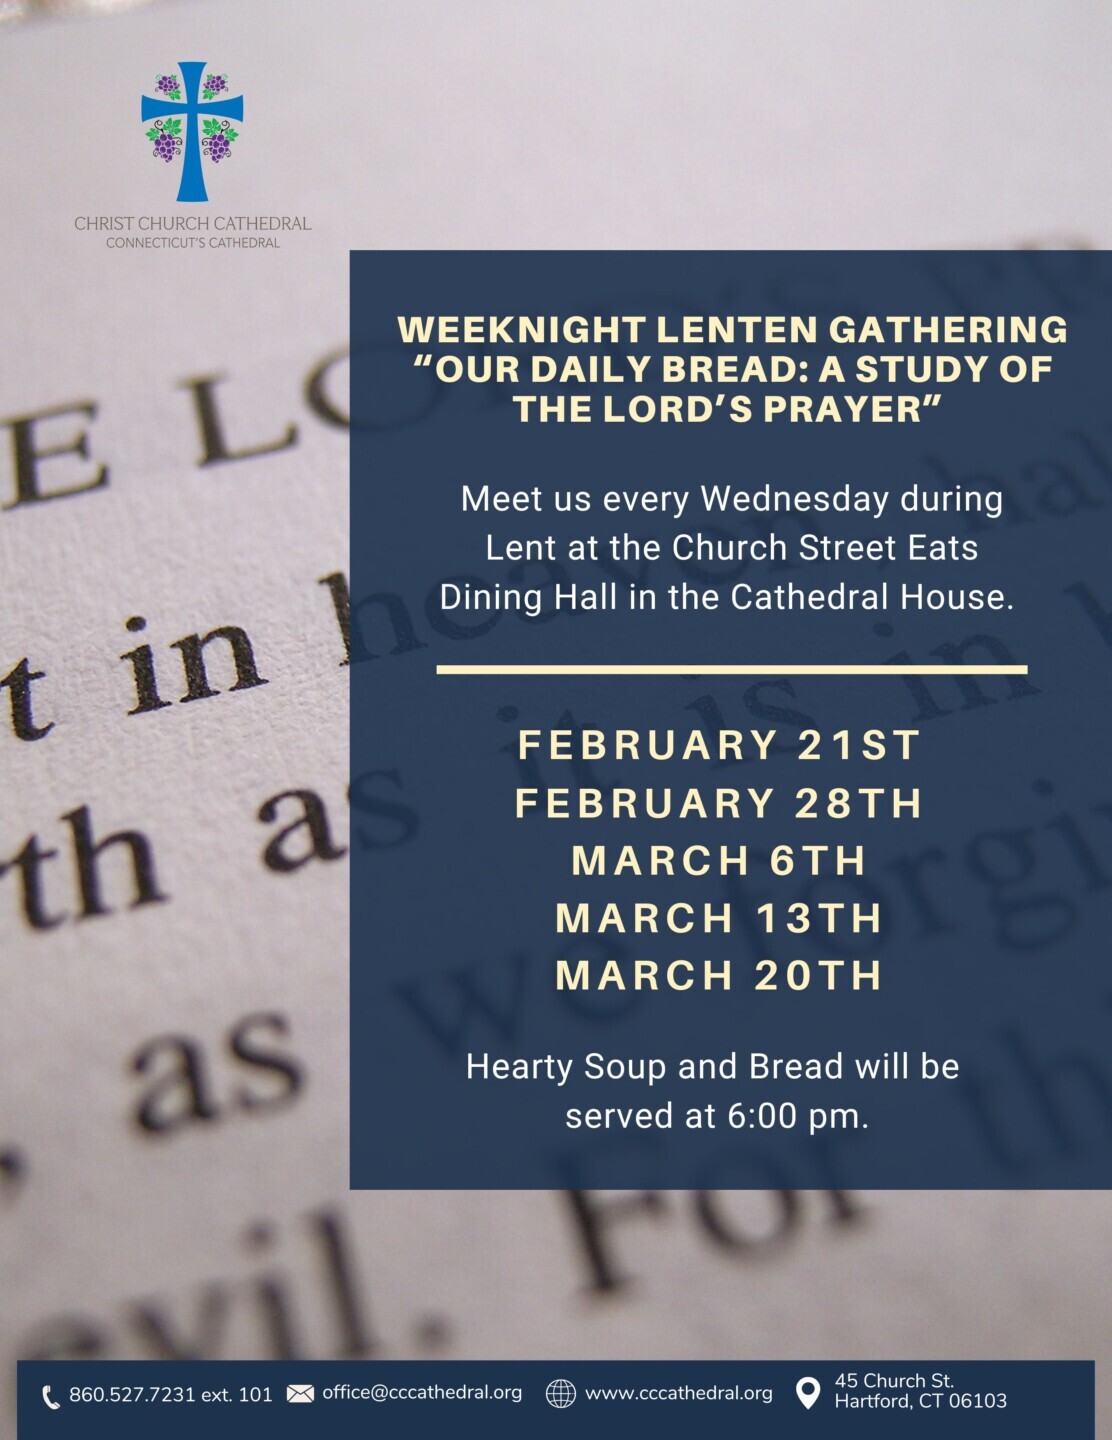 Weeknight Lenten gathering “Our Daily Bread: a Study of the Lord’s Prayer”